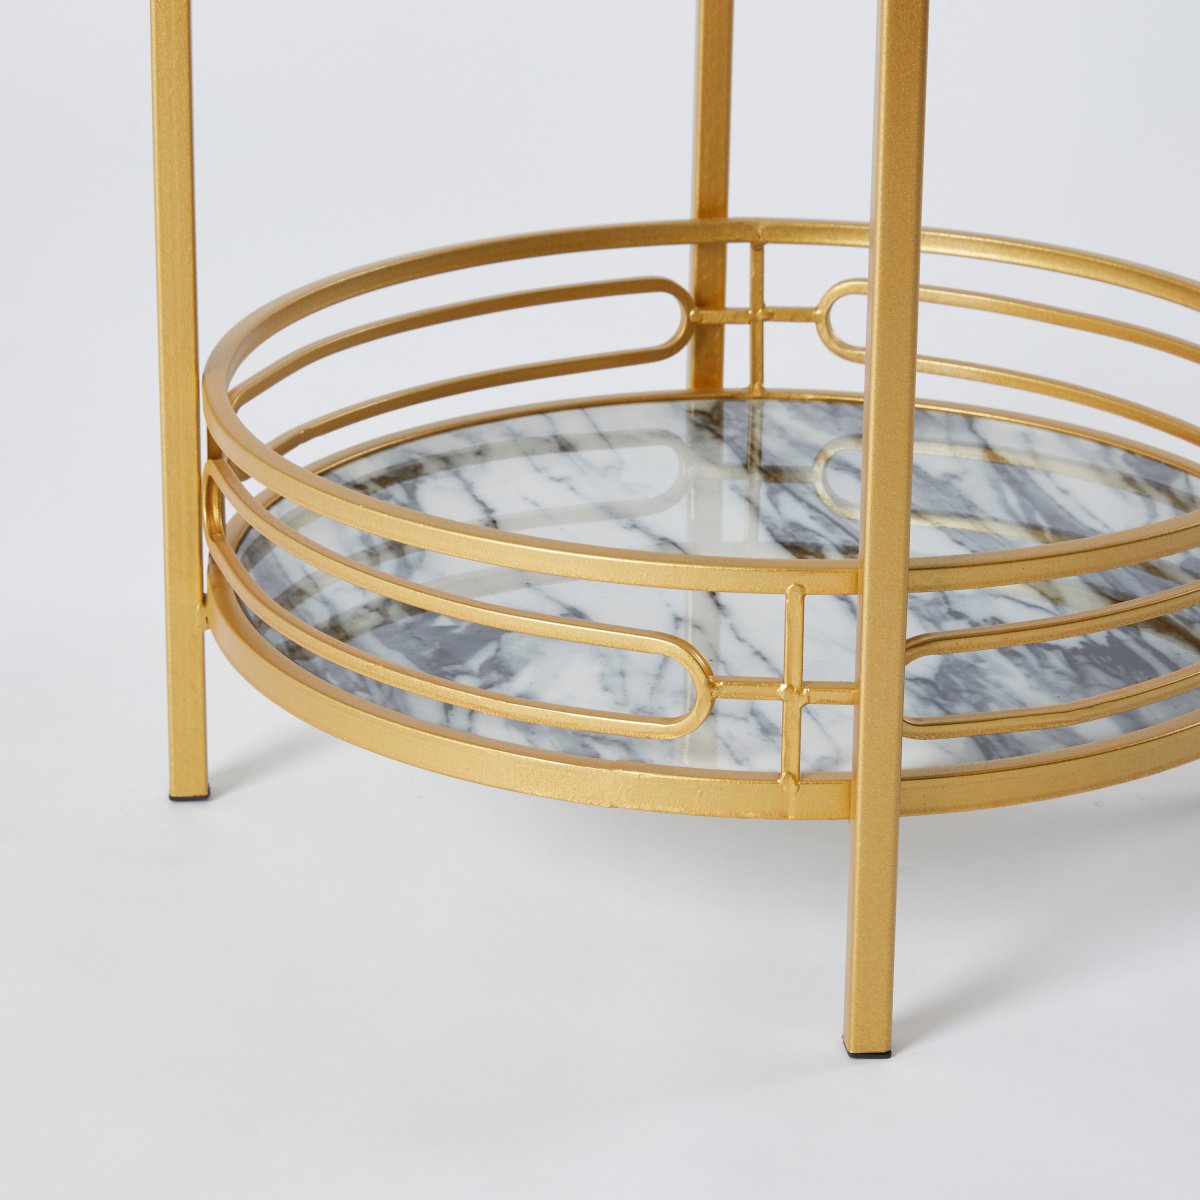 Metallic Glazed Round Table with Wooden Top - 50x50x66 cms - Lifestyle